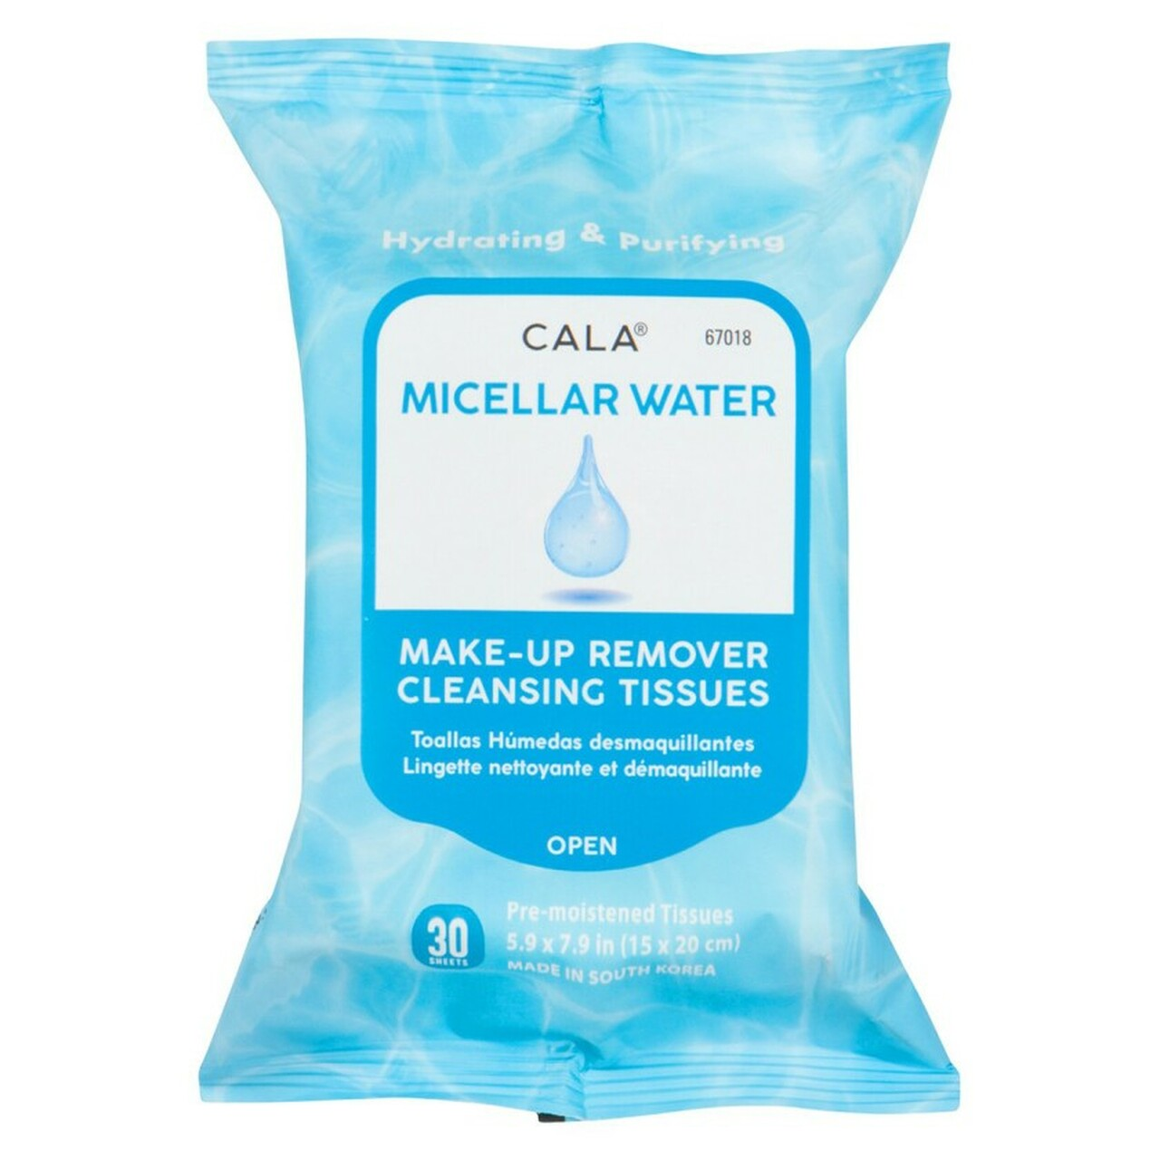 CALA MICELLAR WATER MAKE-UP REMOVER CLEANSING TISSUES  (60 SHEETS / PK)